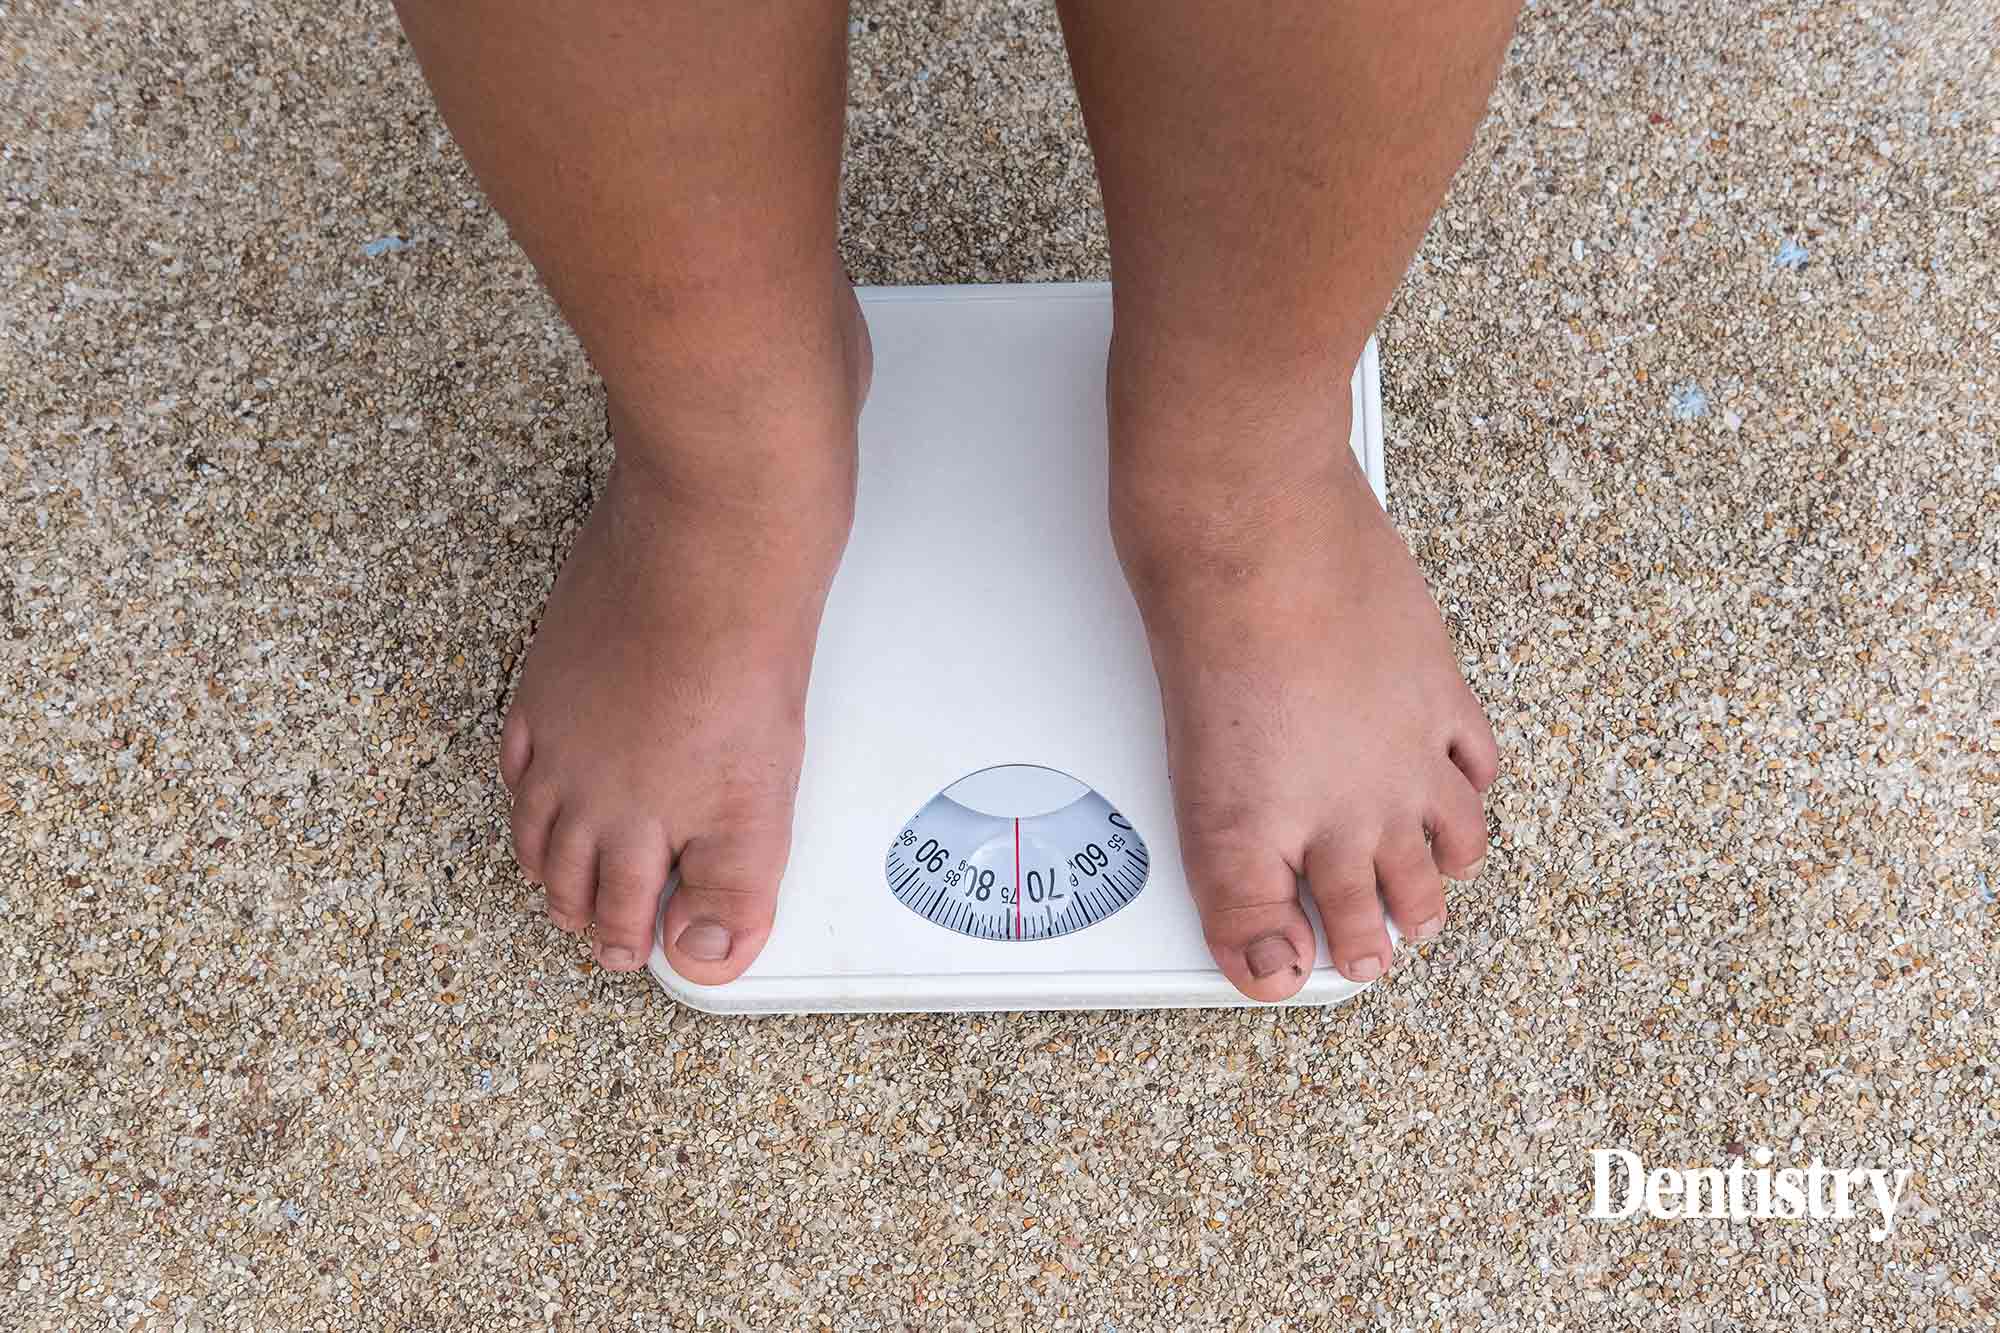 Obesity rates among infants has soared by almost 5% in only one year